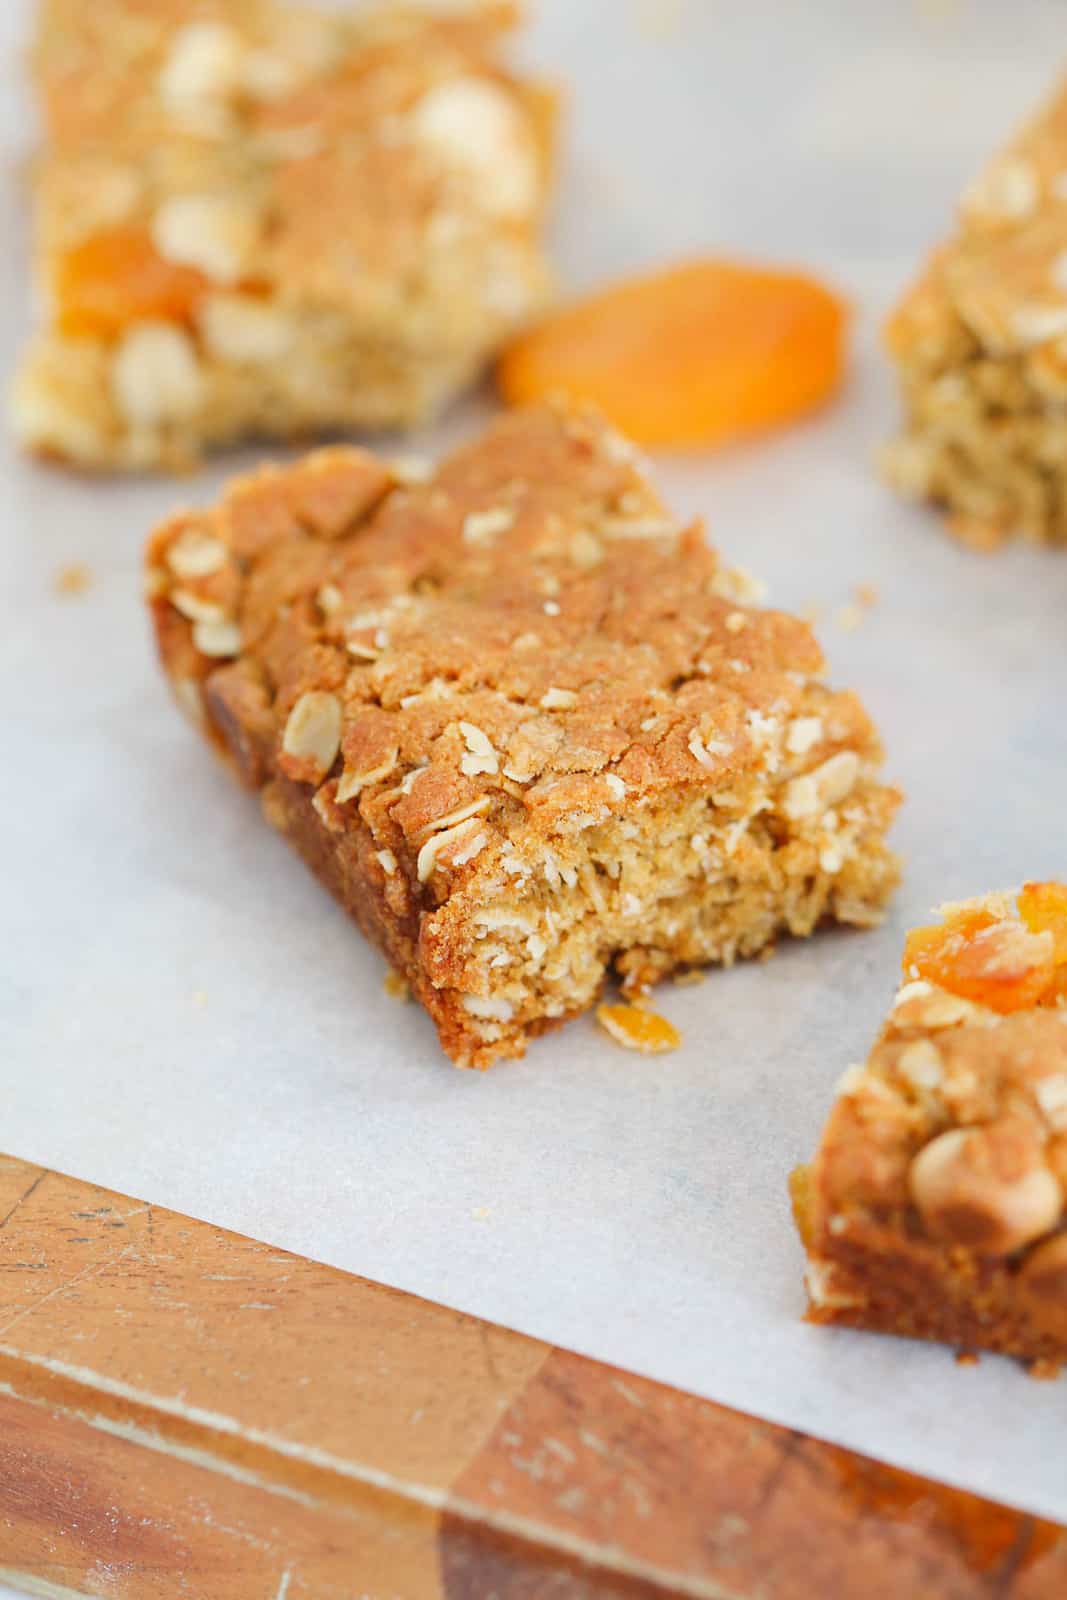 An square of apricot oat slice on a piece of paper surrounded by other slices and dried apricots